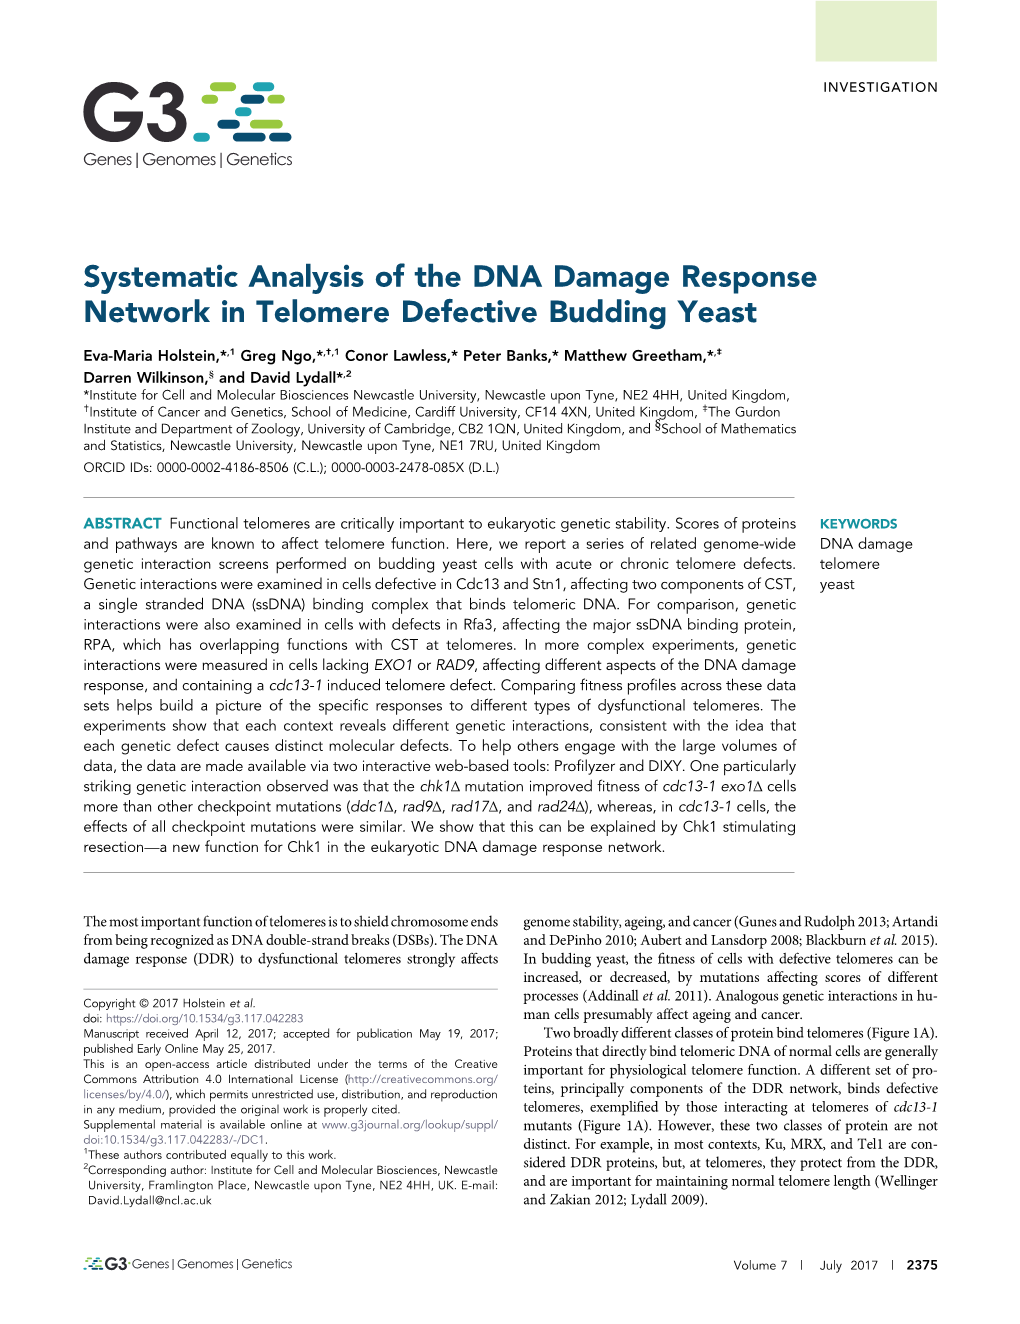 Systematic Analysis of the DNA Damage Response Network in Telomere Defective Budding Yeast